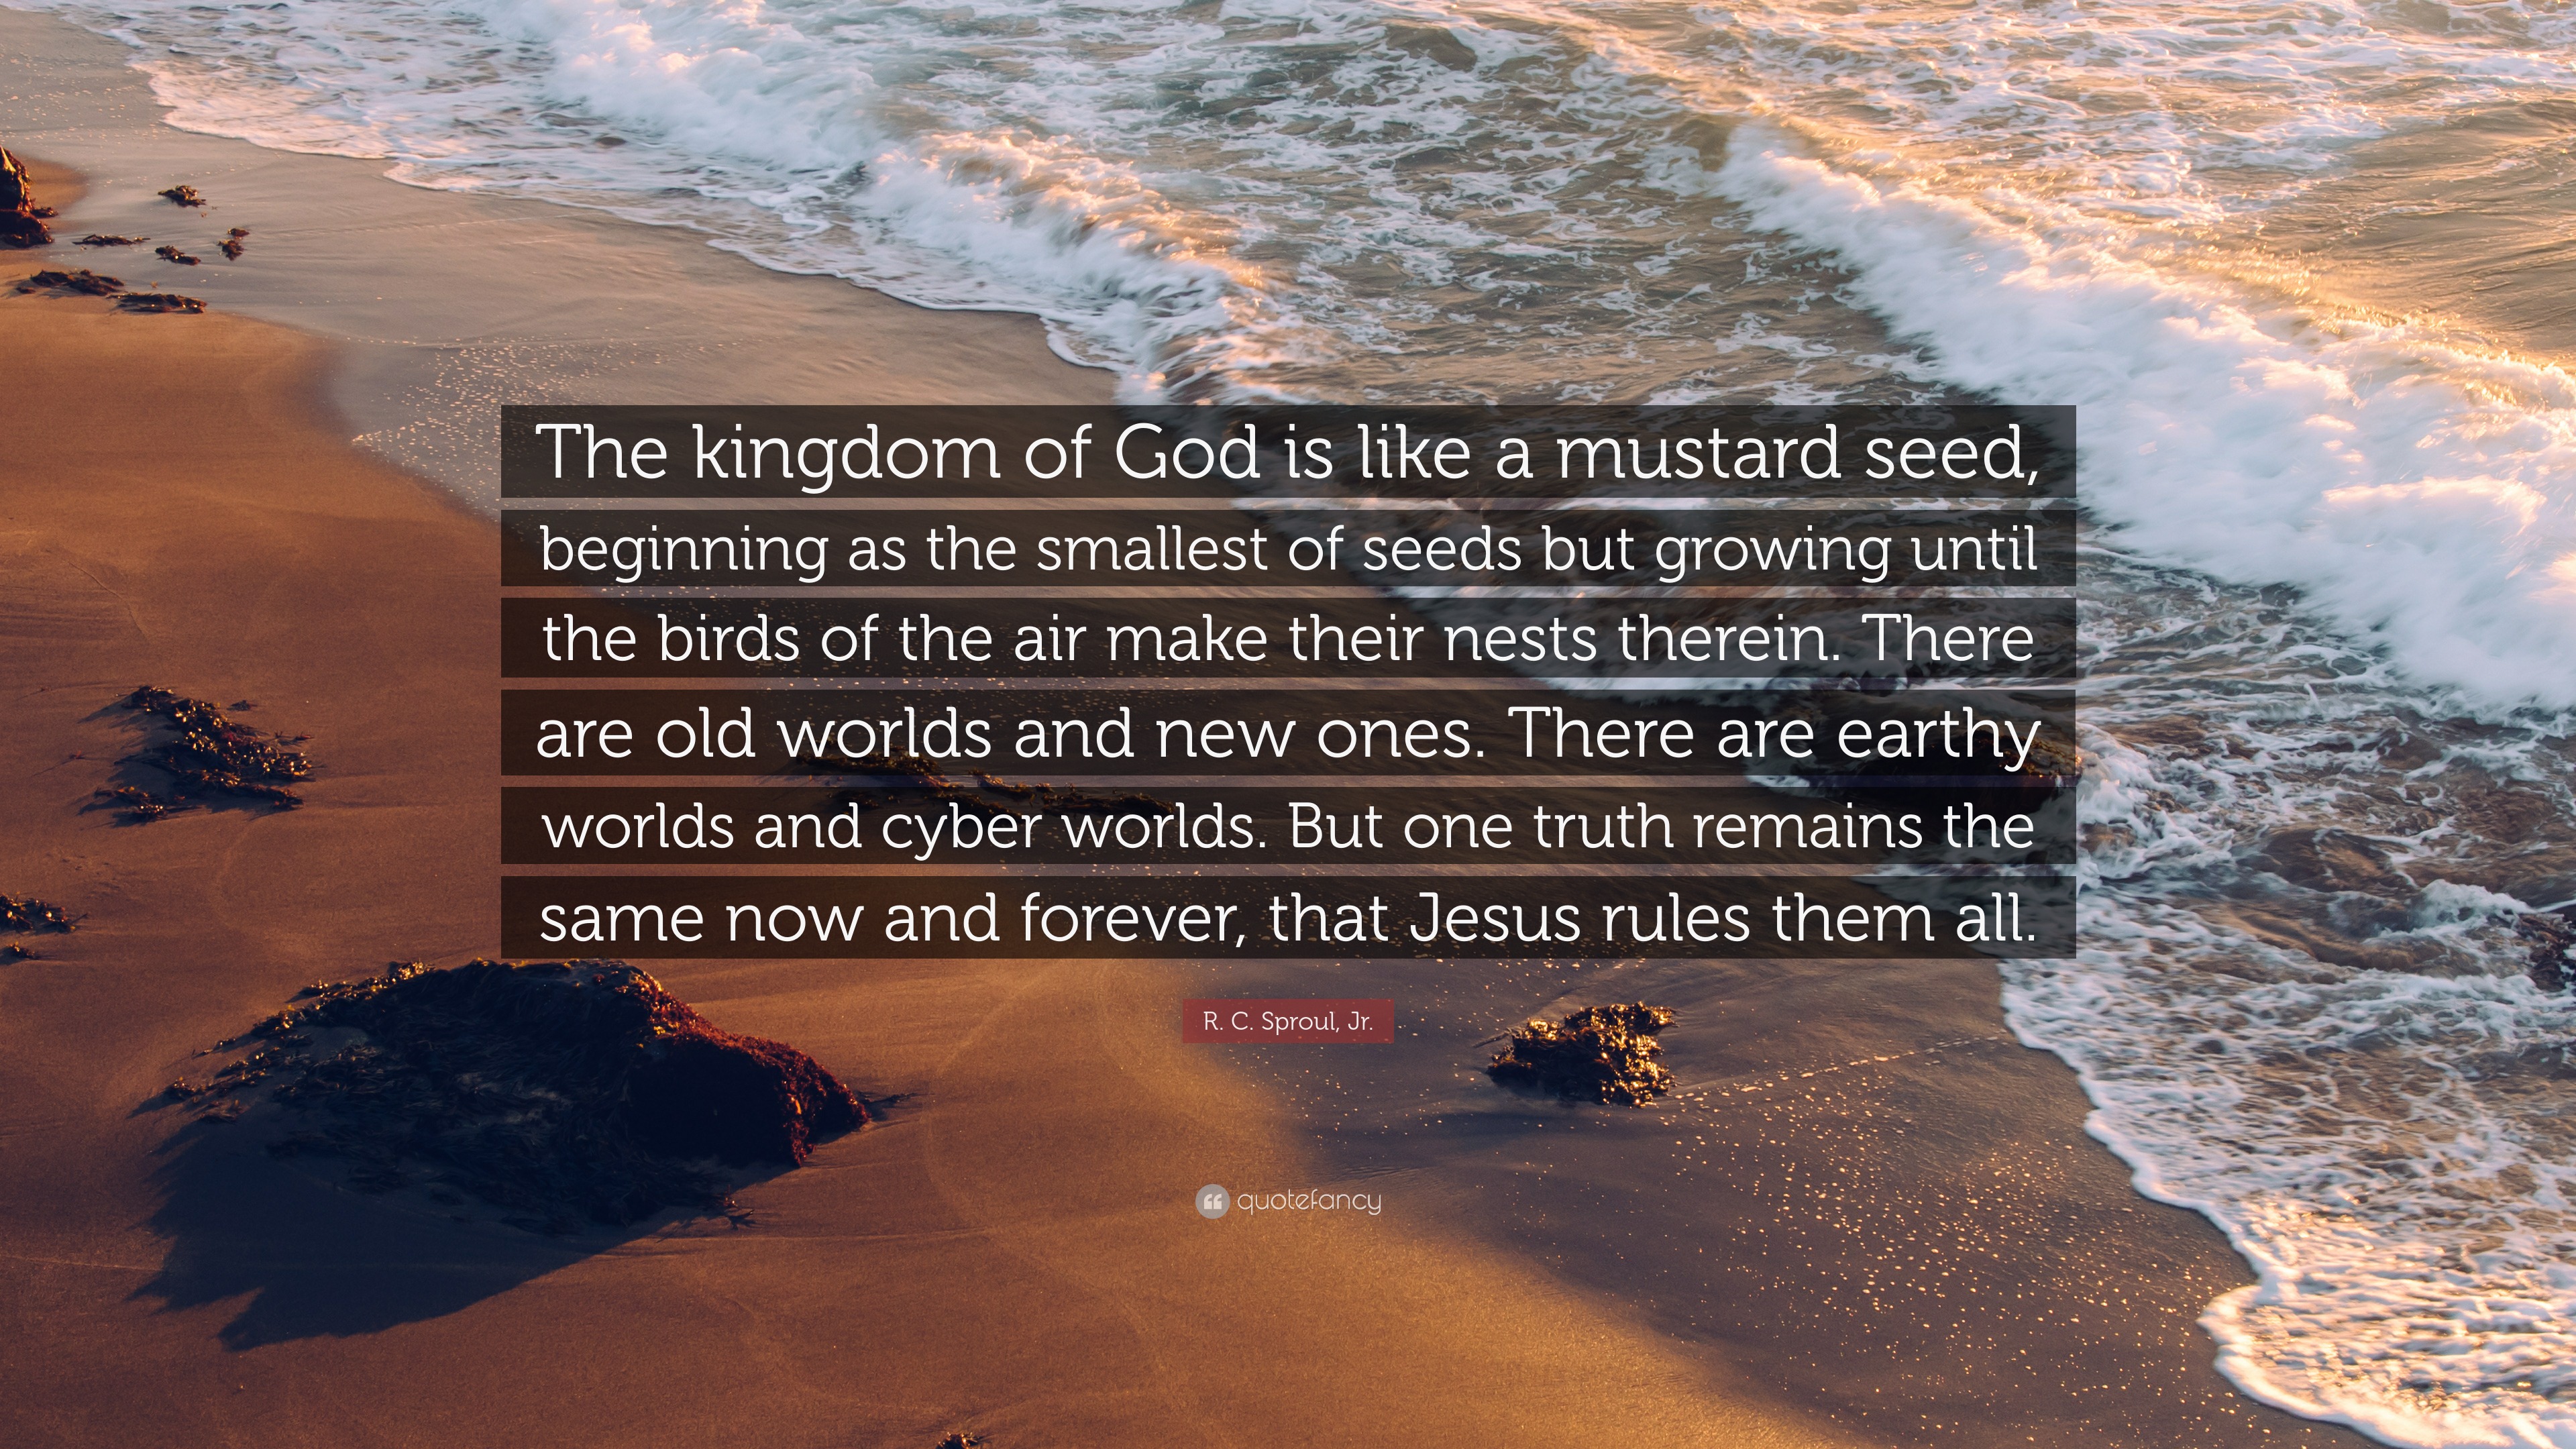 R. C. Sproul, Jr. Quote: “The kingdom of God is like a mustard seed